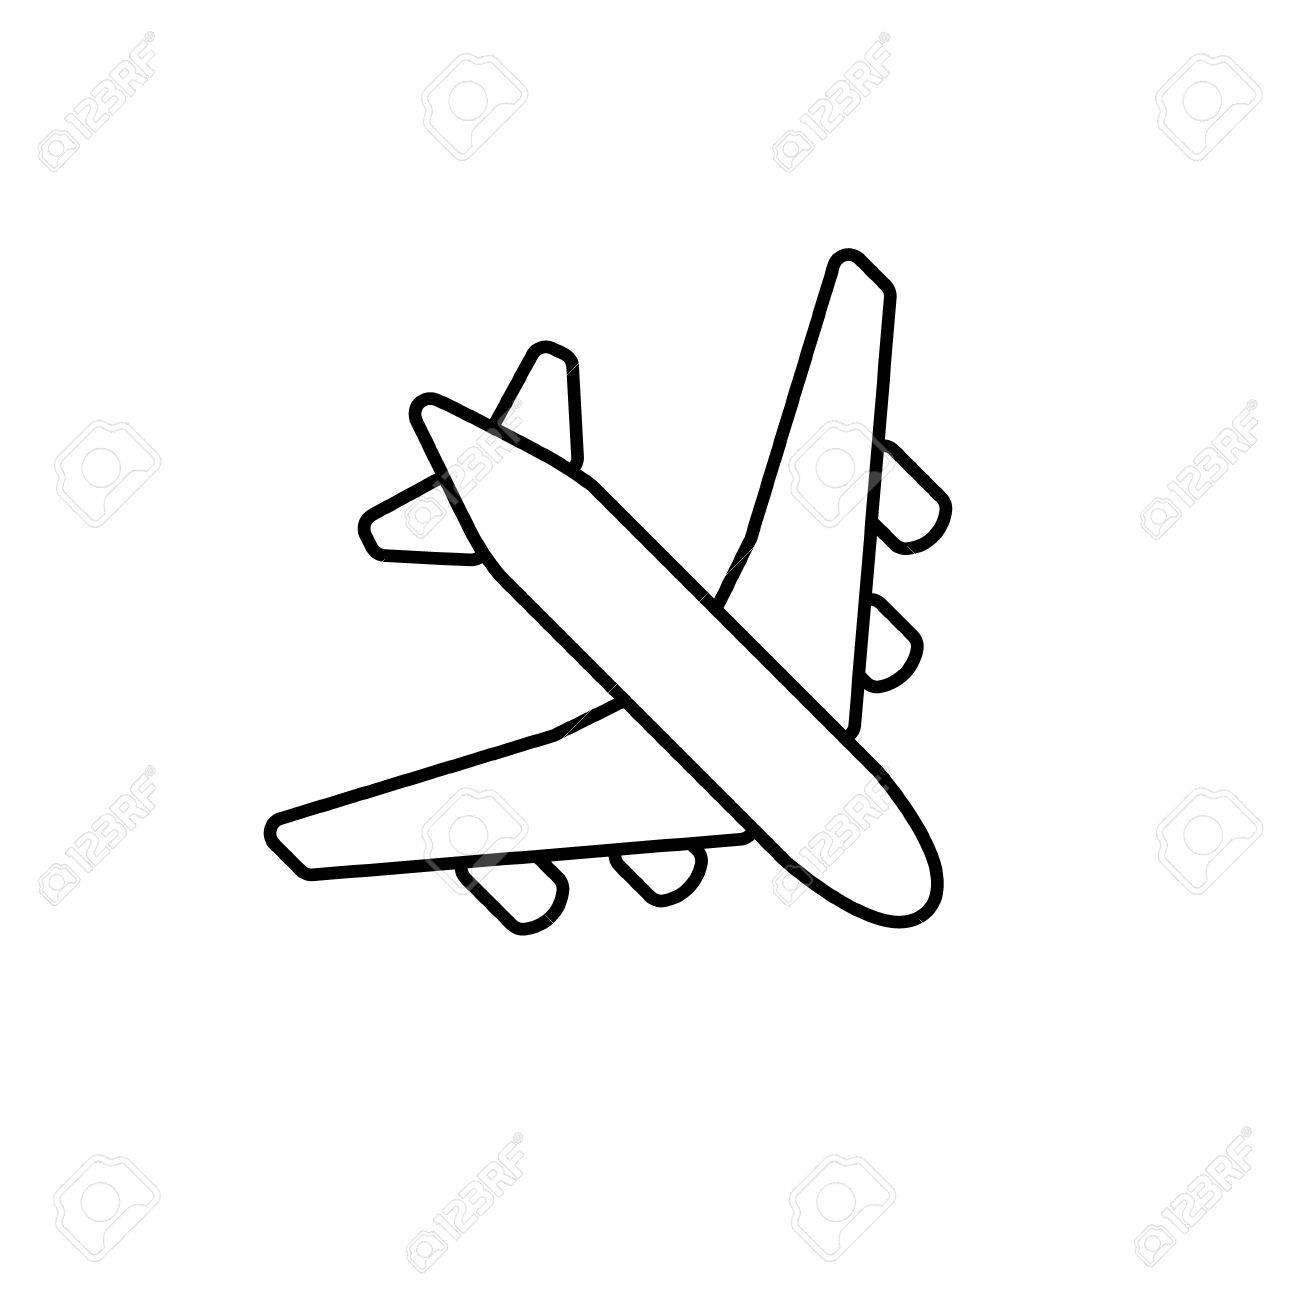 Airplane clipart easy, Airplane easy Transparent FREE for